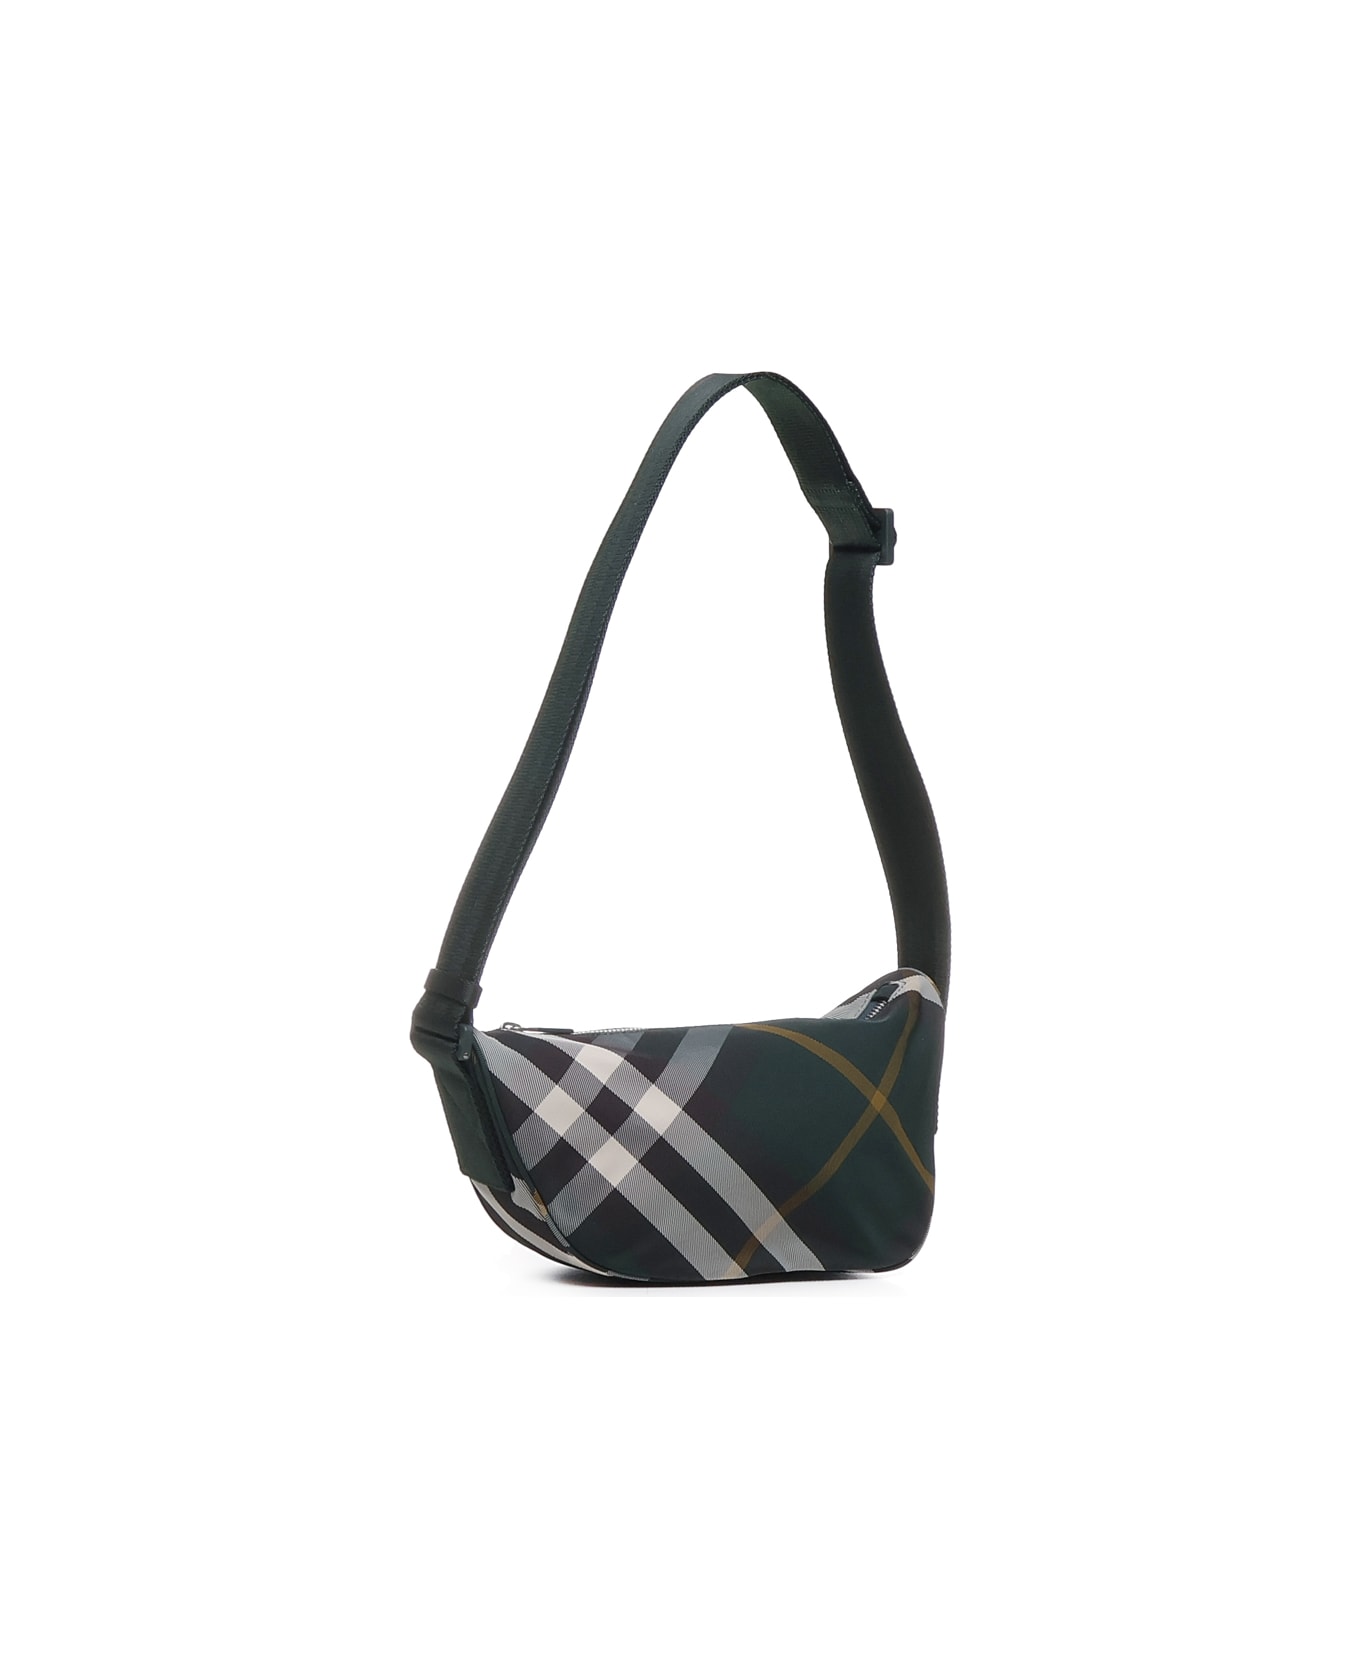 Burberry Check Pouch Bag - Ivy